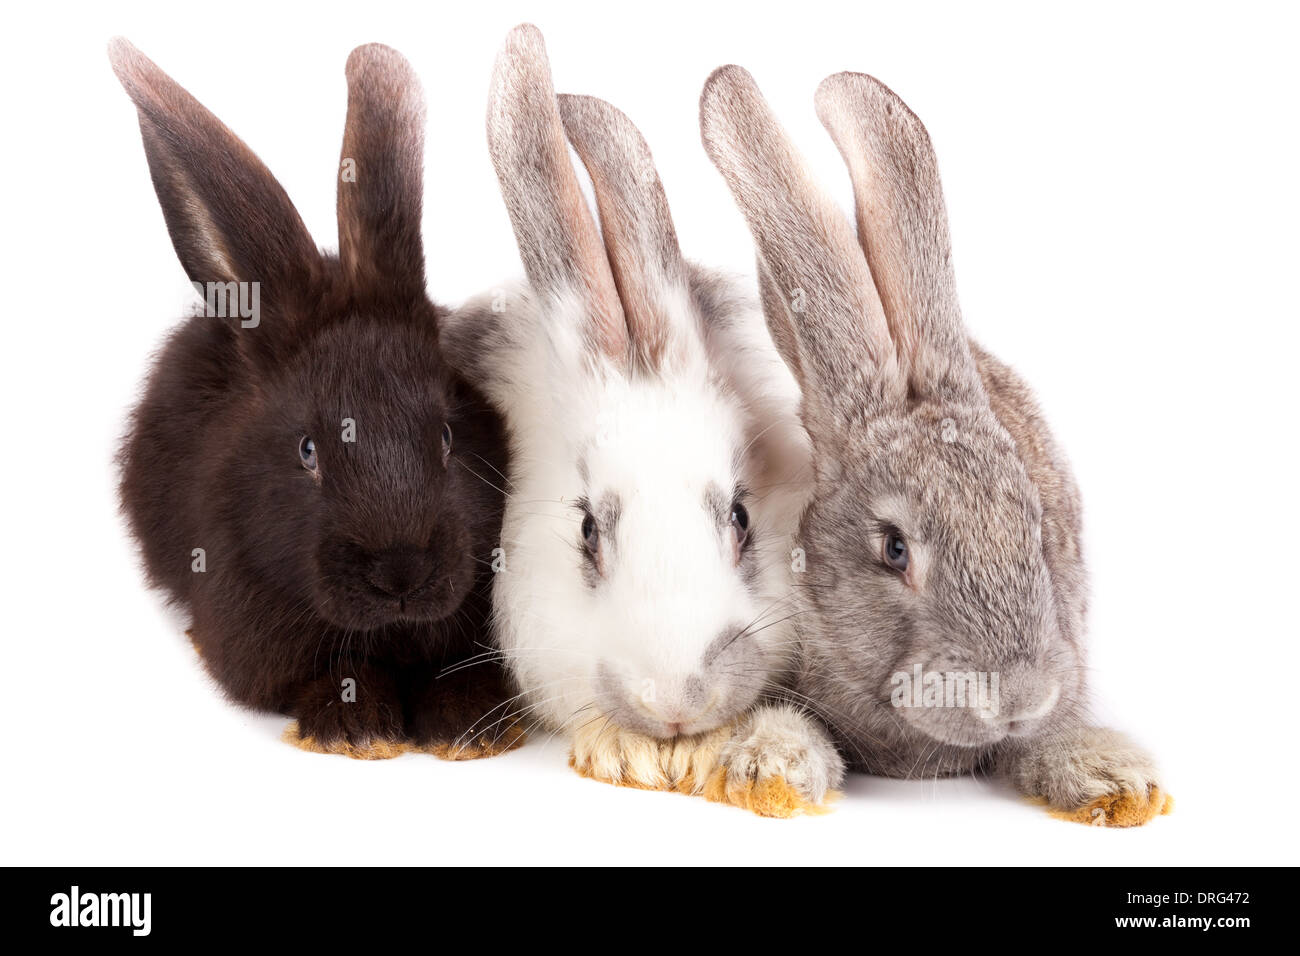 Domestic rabbit it is isolated in studio on a white background. Stock Photo